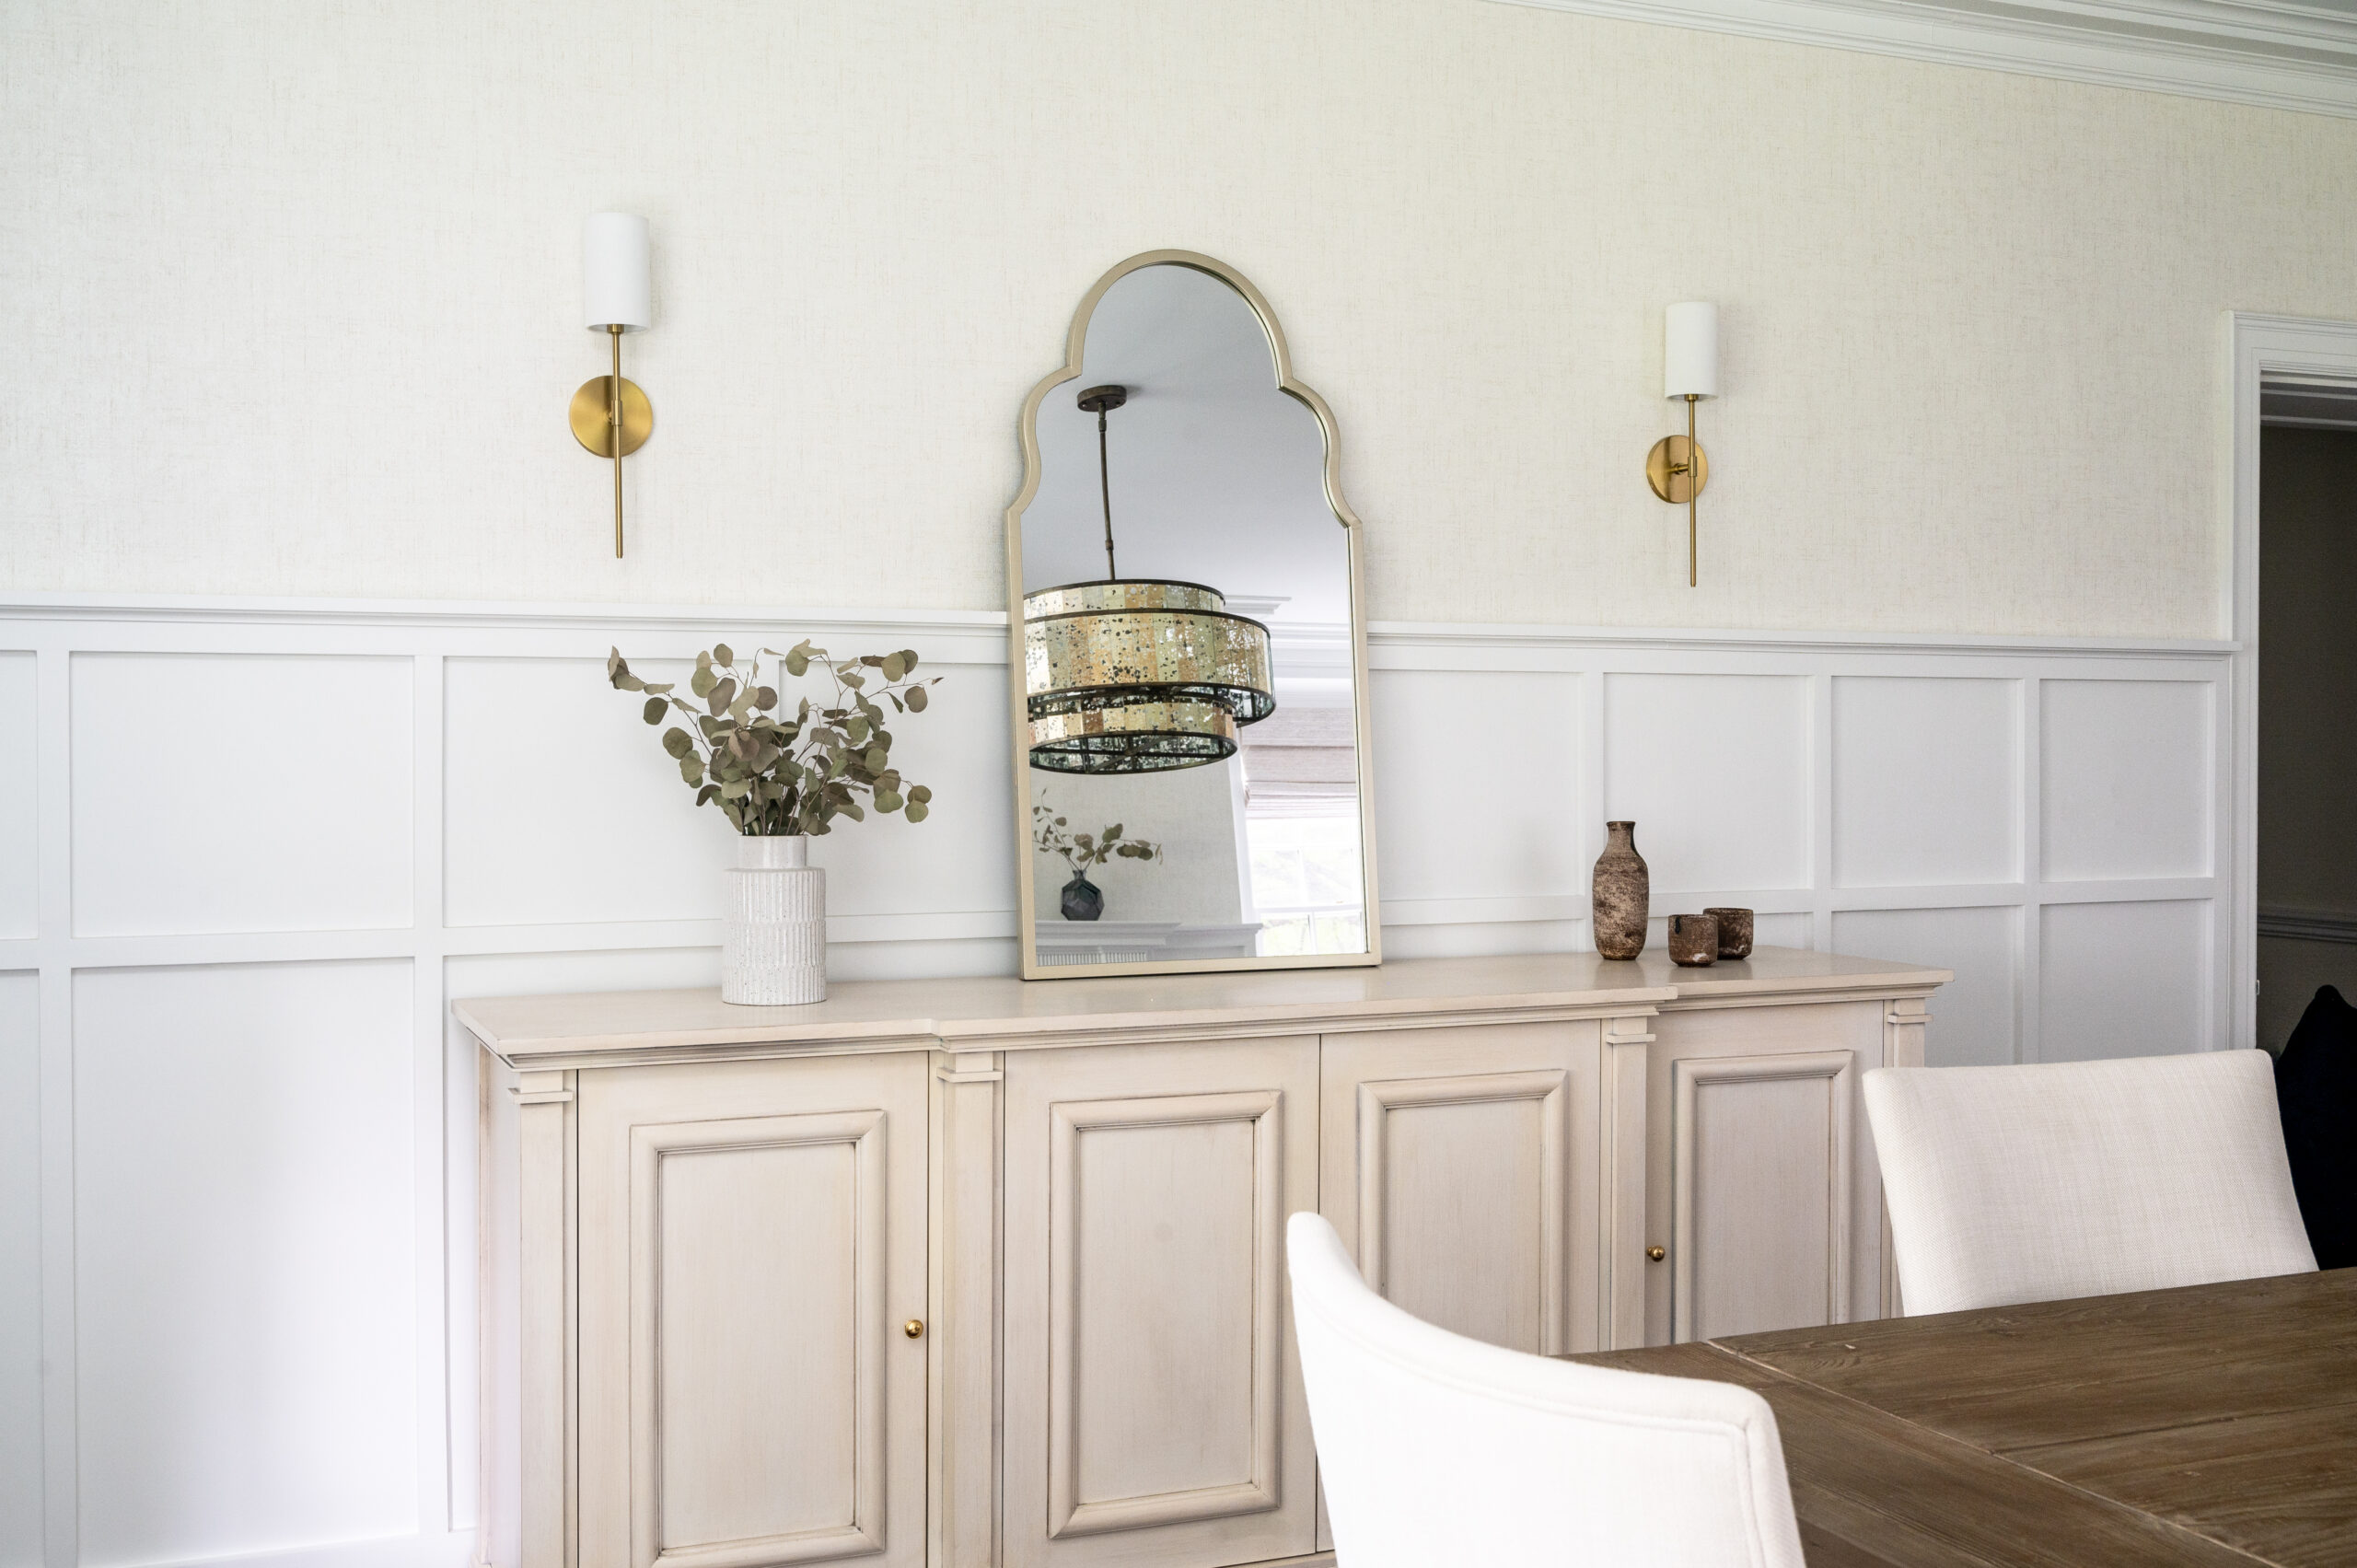 Beautiful console, gold wall scones with white linen shades, and grasscloth wallpaper above custom wainscotting.